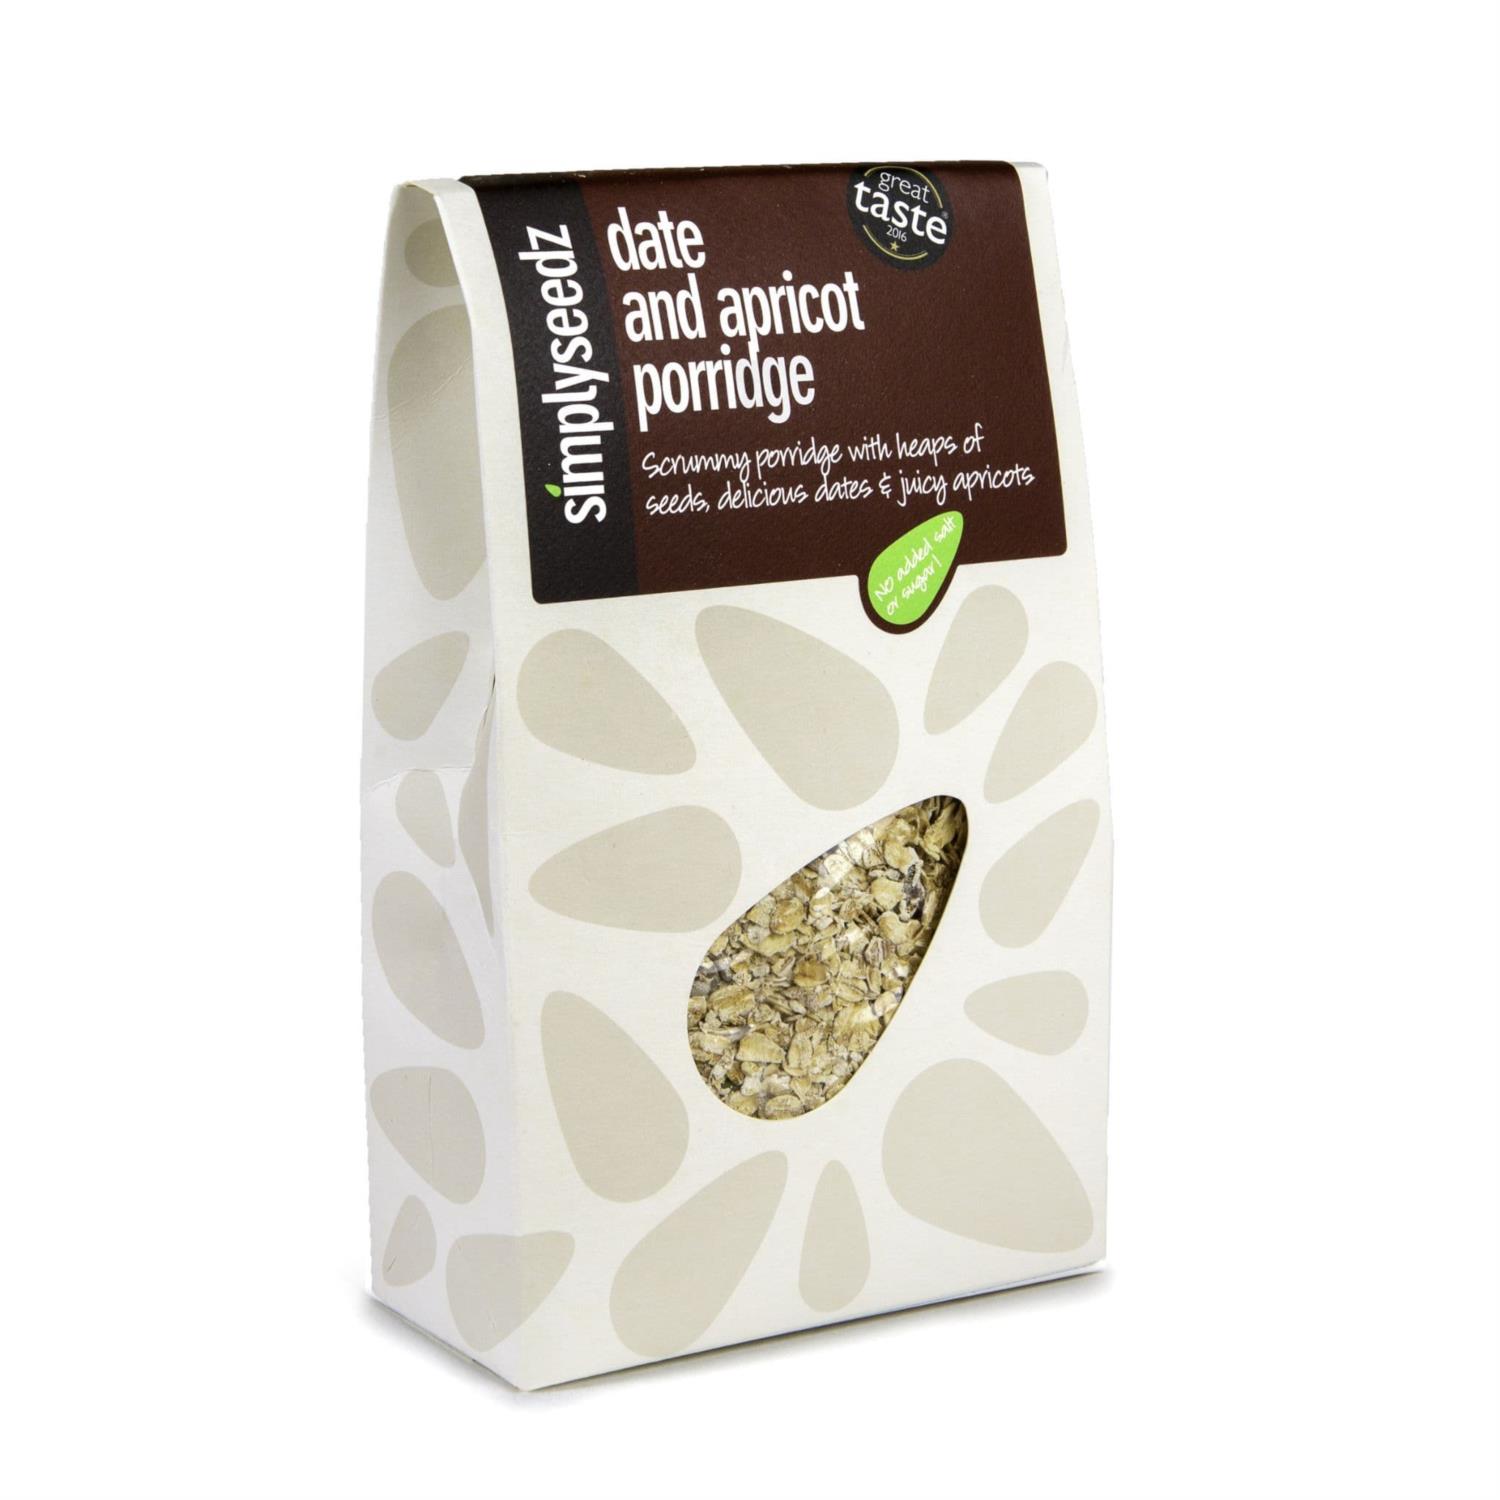 Sweetbird Frappe Portion Scoop 40g